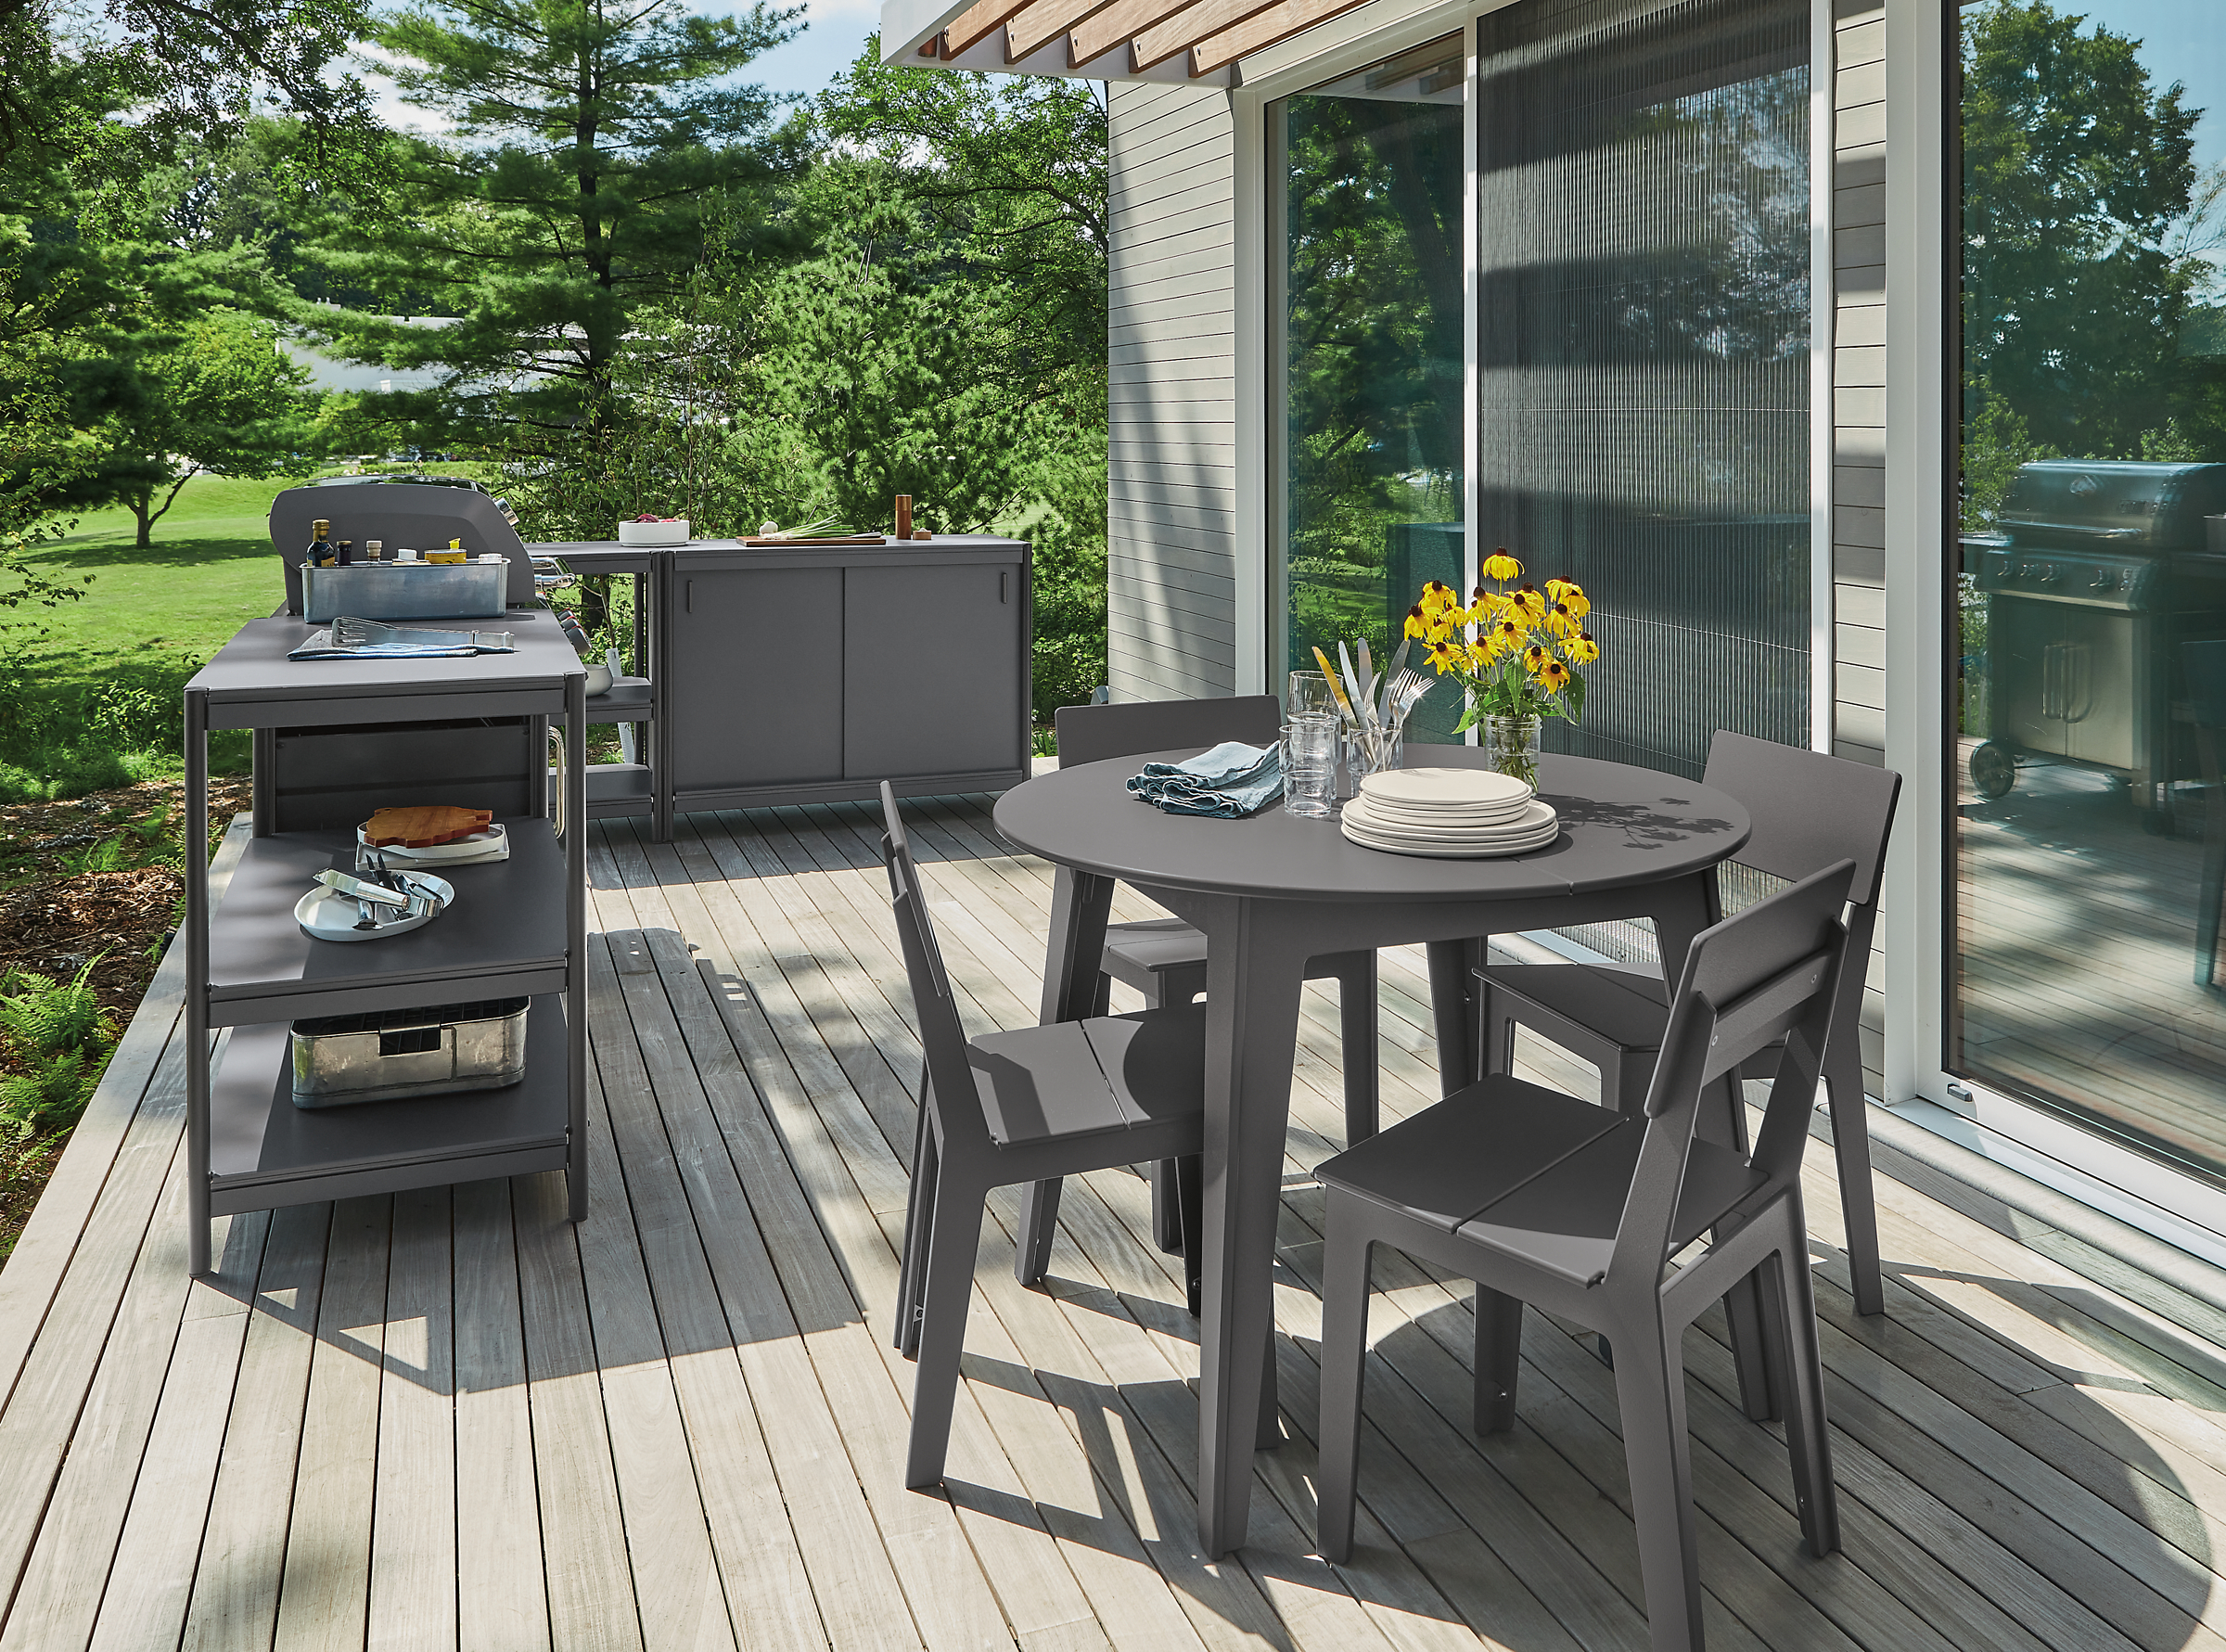 Outdoor space with Granger kitchen island and grill, Aspen table, ASpen chairs.